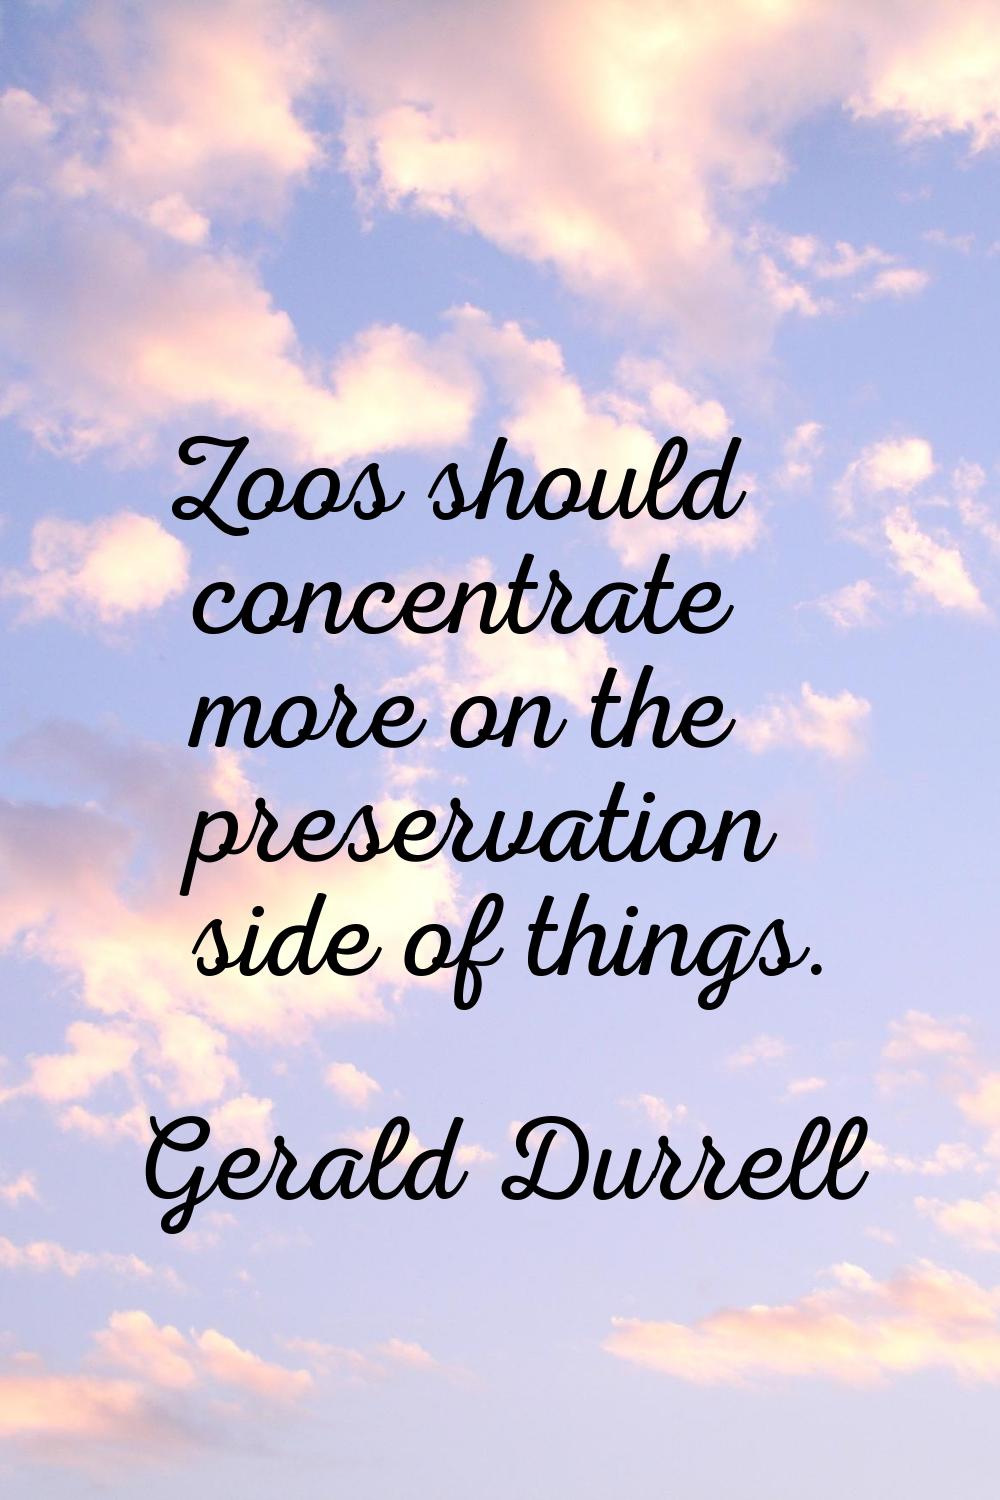 Zoos should concentrate more on the preservation side of things.